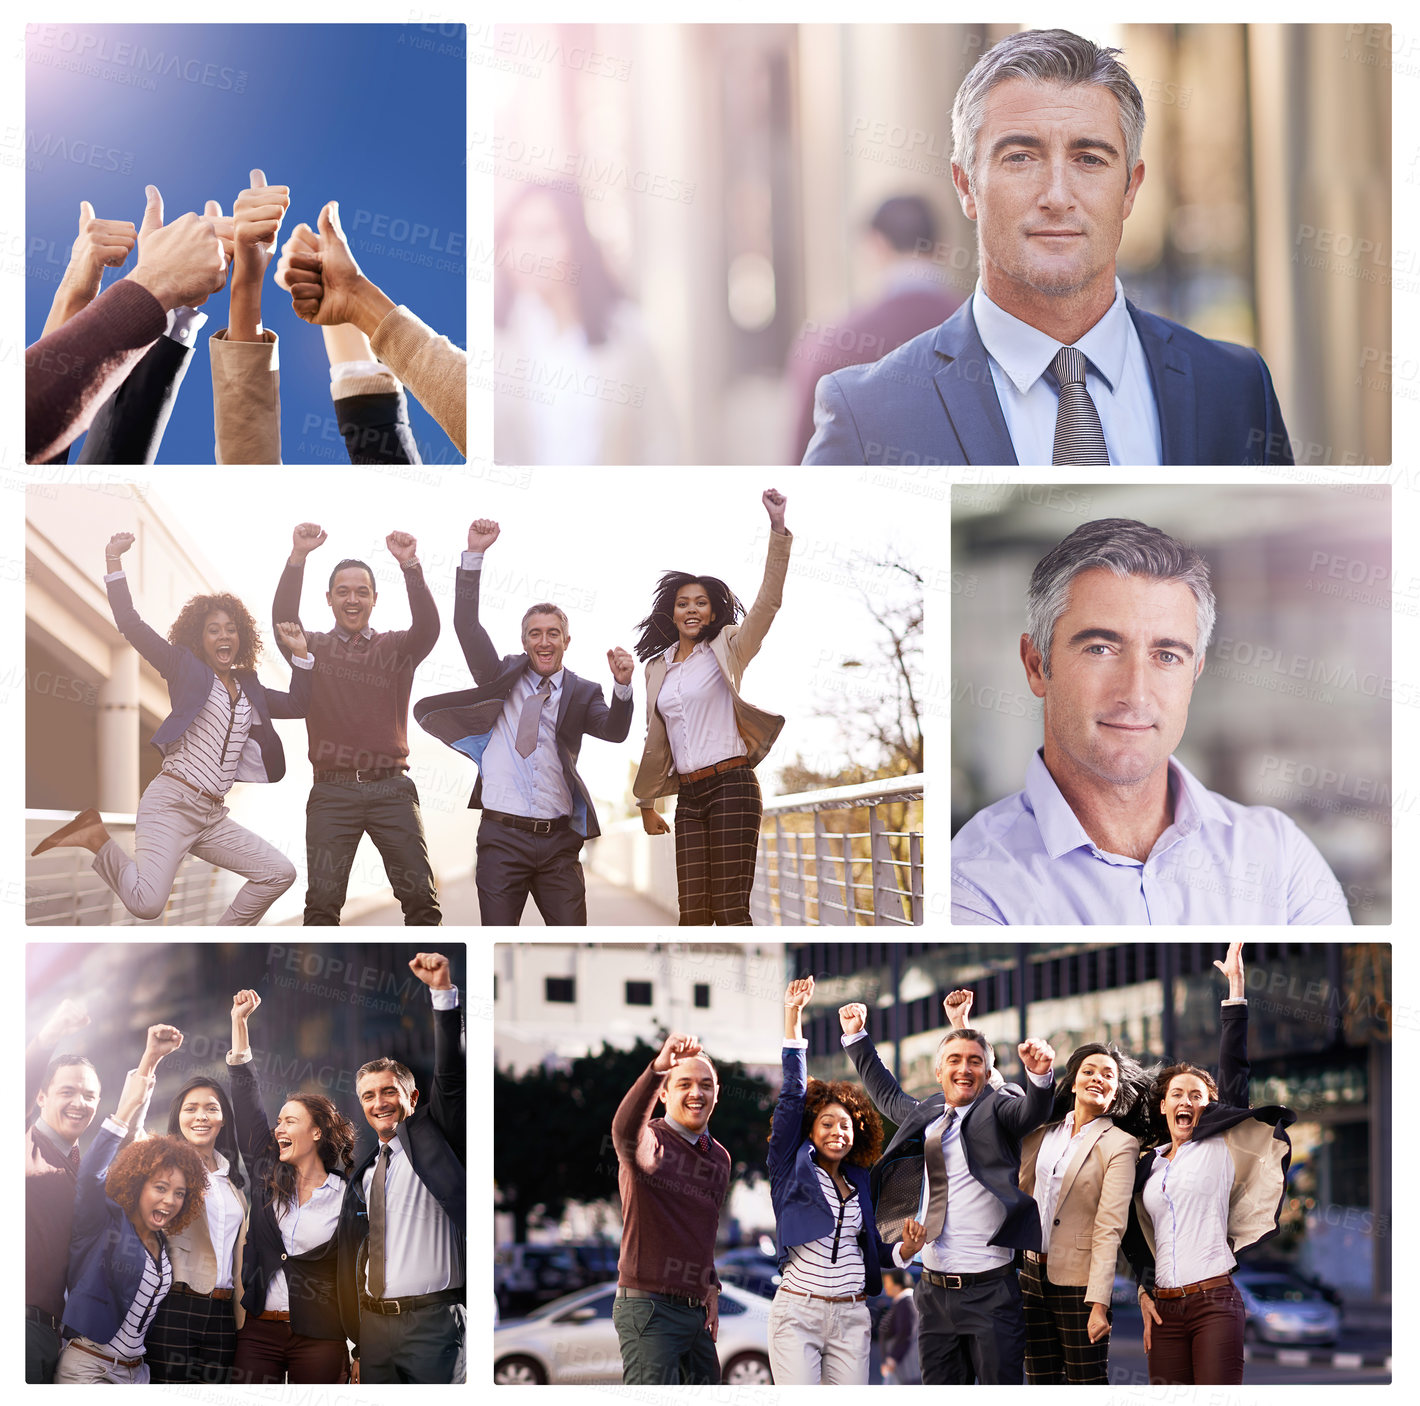 Buy stock photo Composite image of businesspeople in different environments